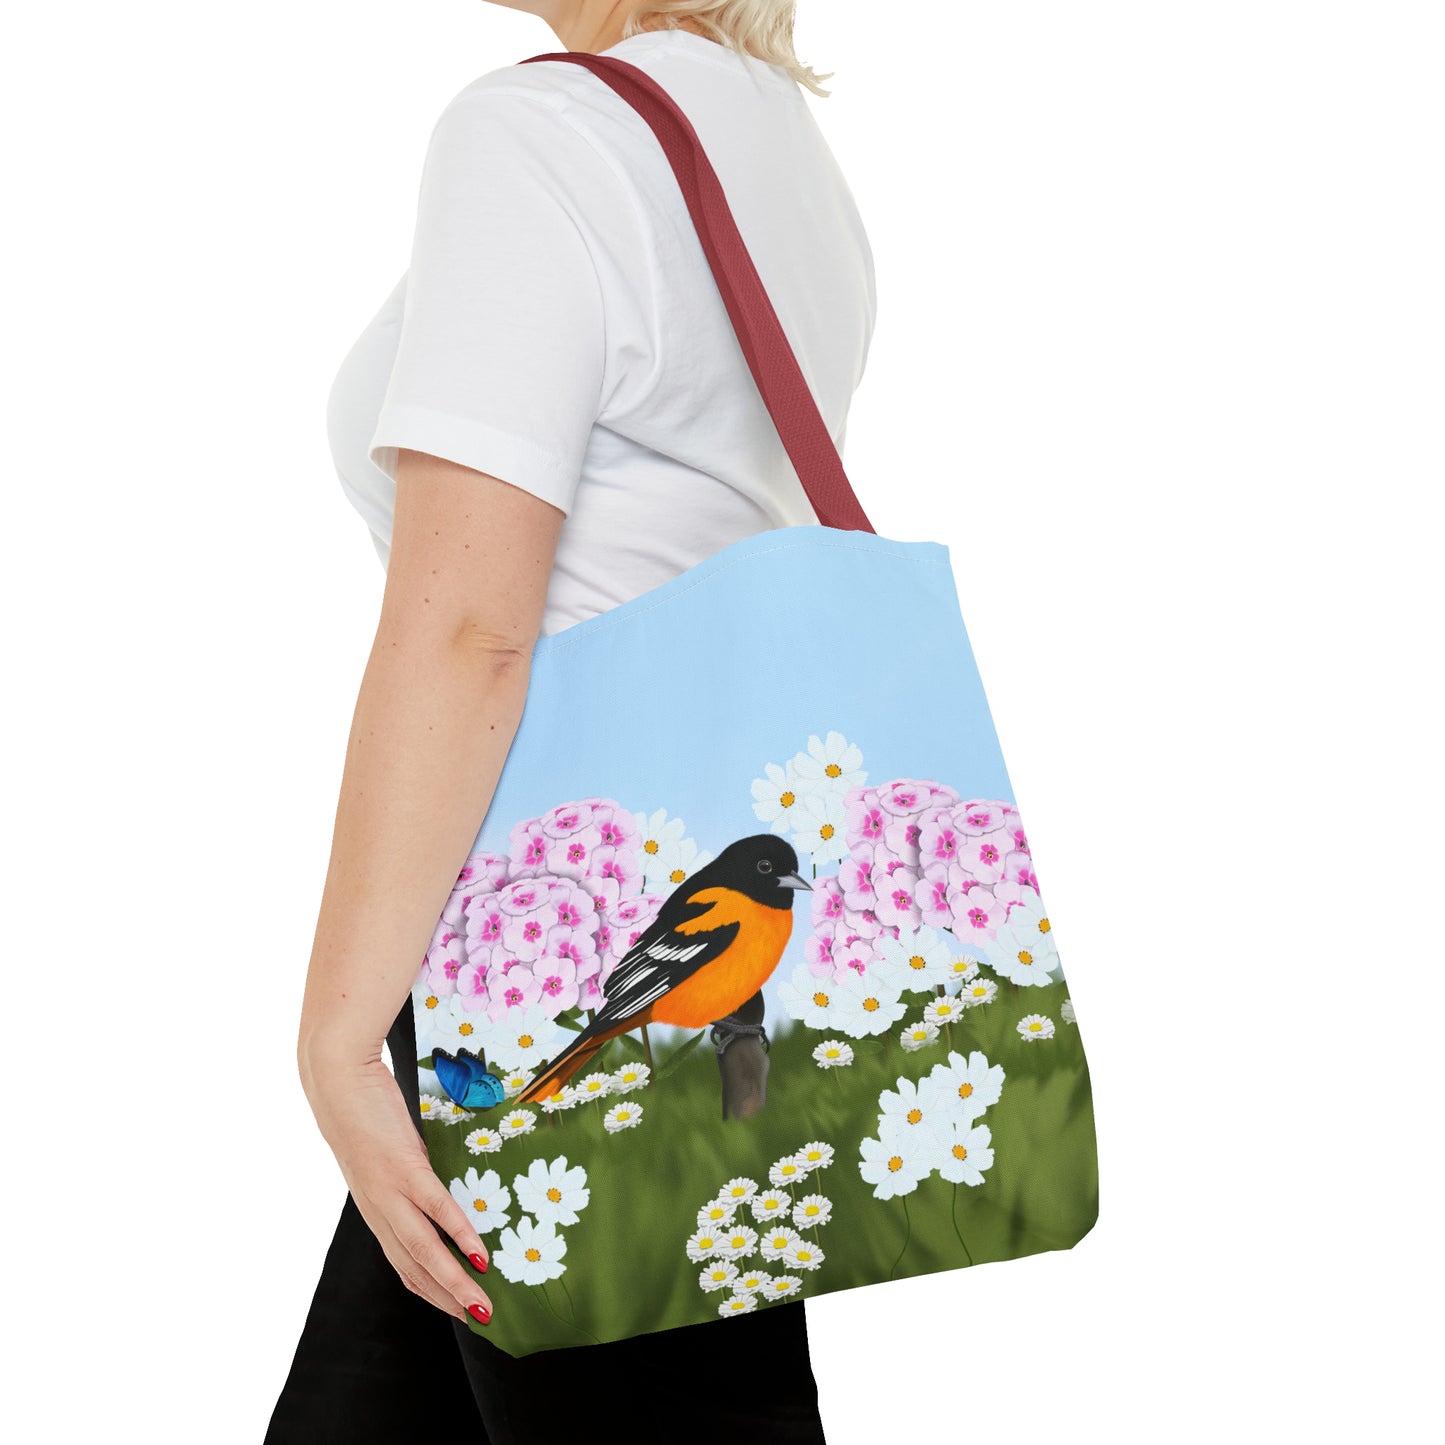 Baltimore Oriole in Summer Flowers Bird Tote Bag 16"x16"